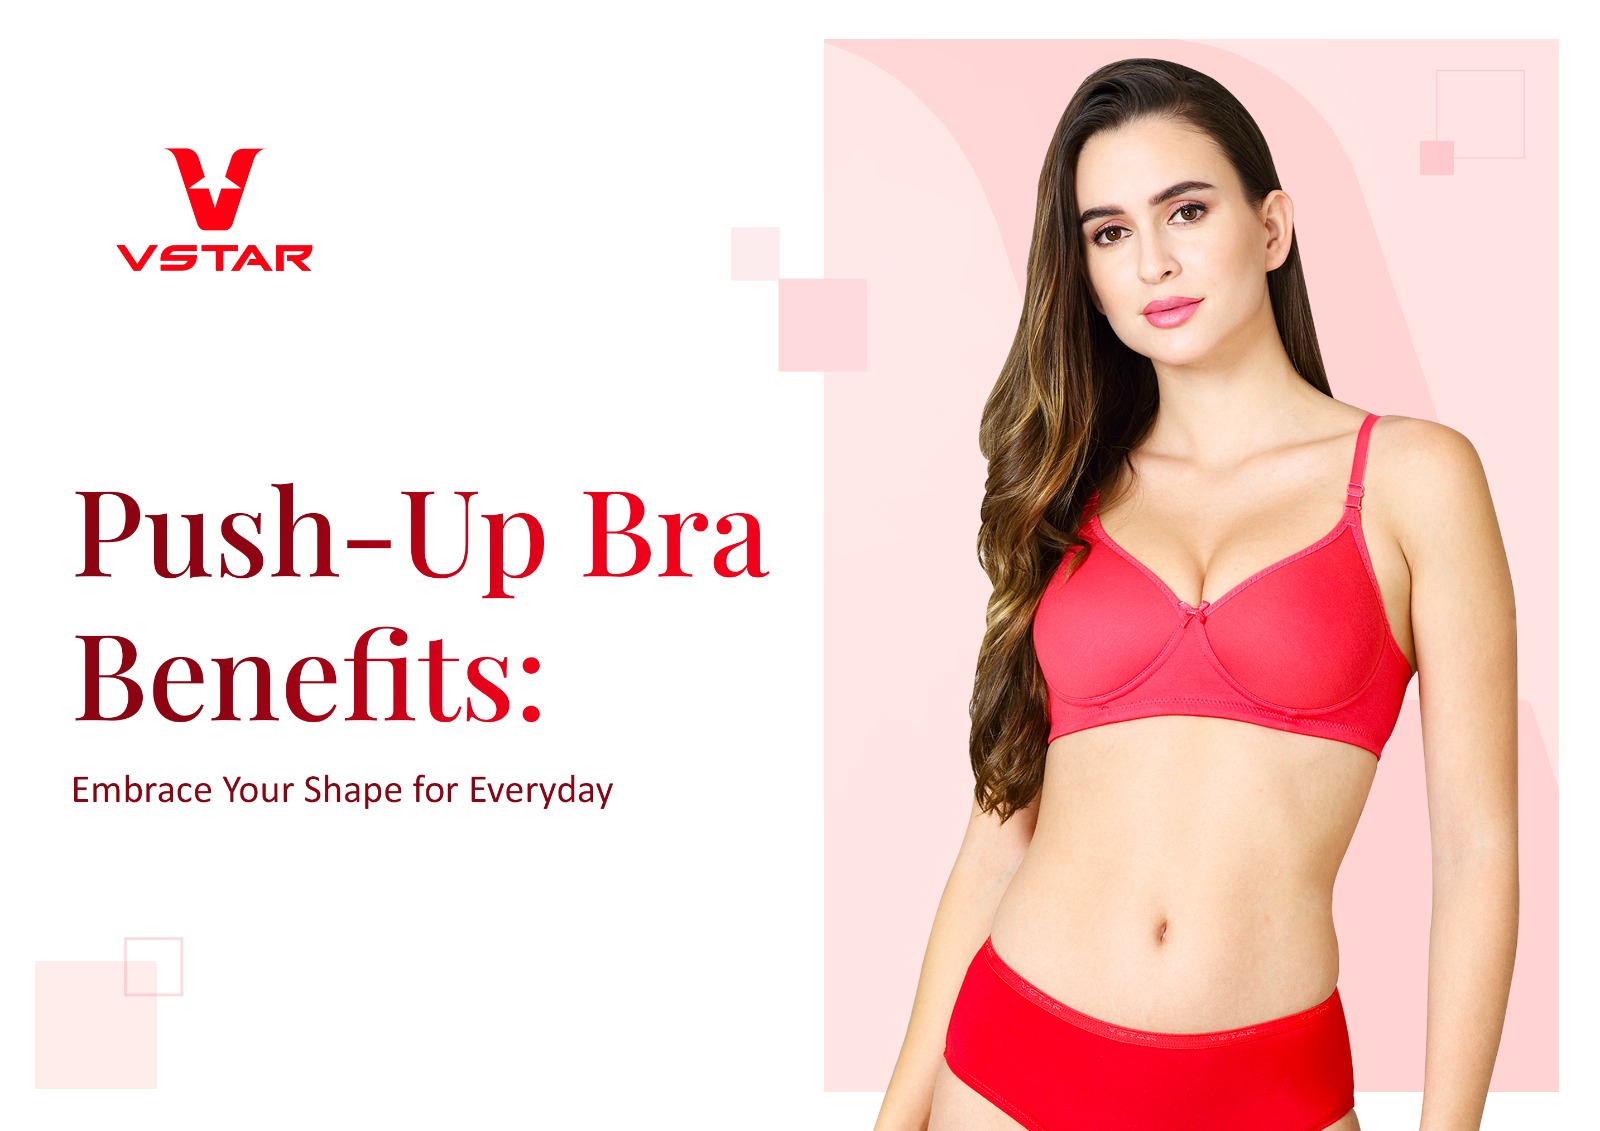 Which Type of Bra Is Best For Daily Use